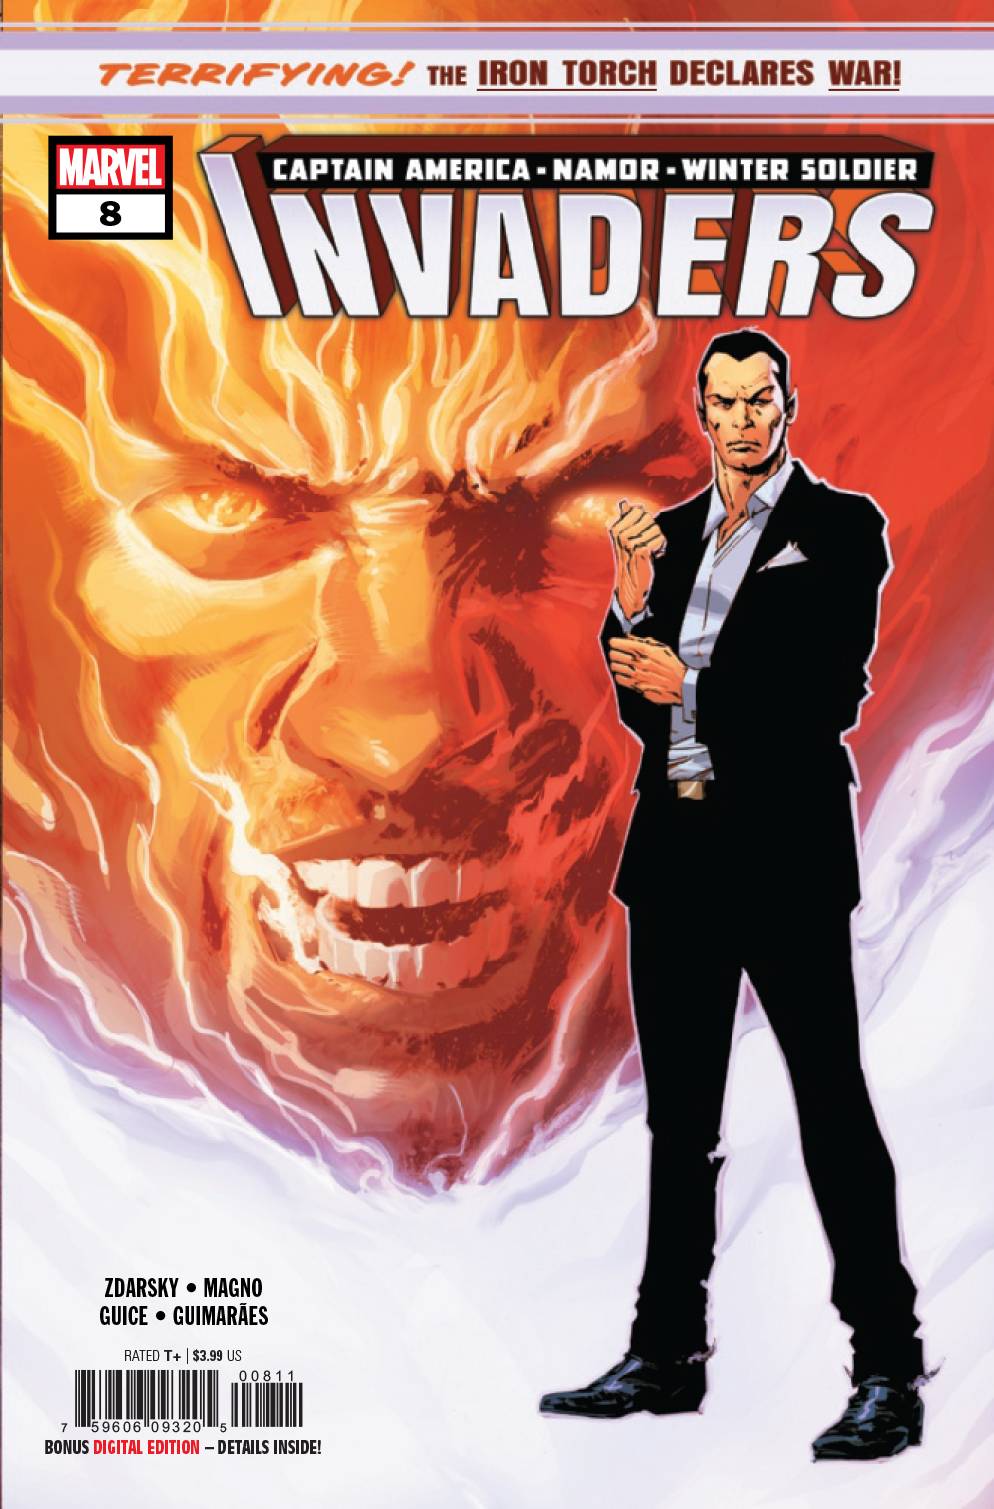 INVADERS #8